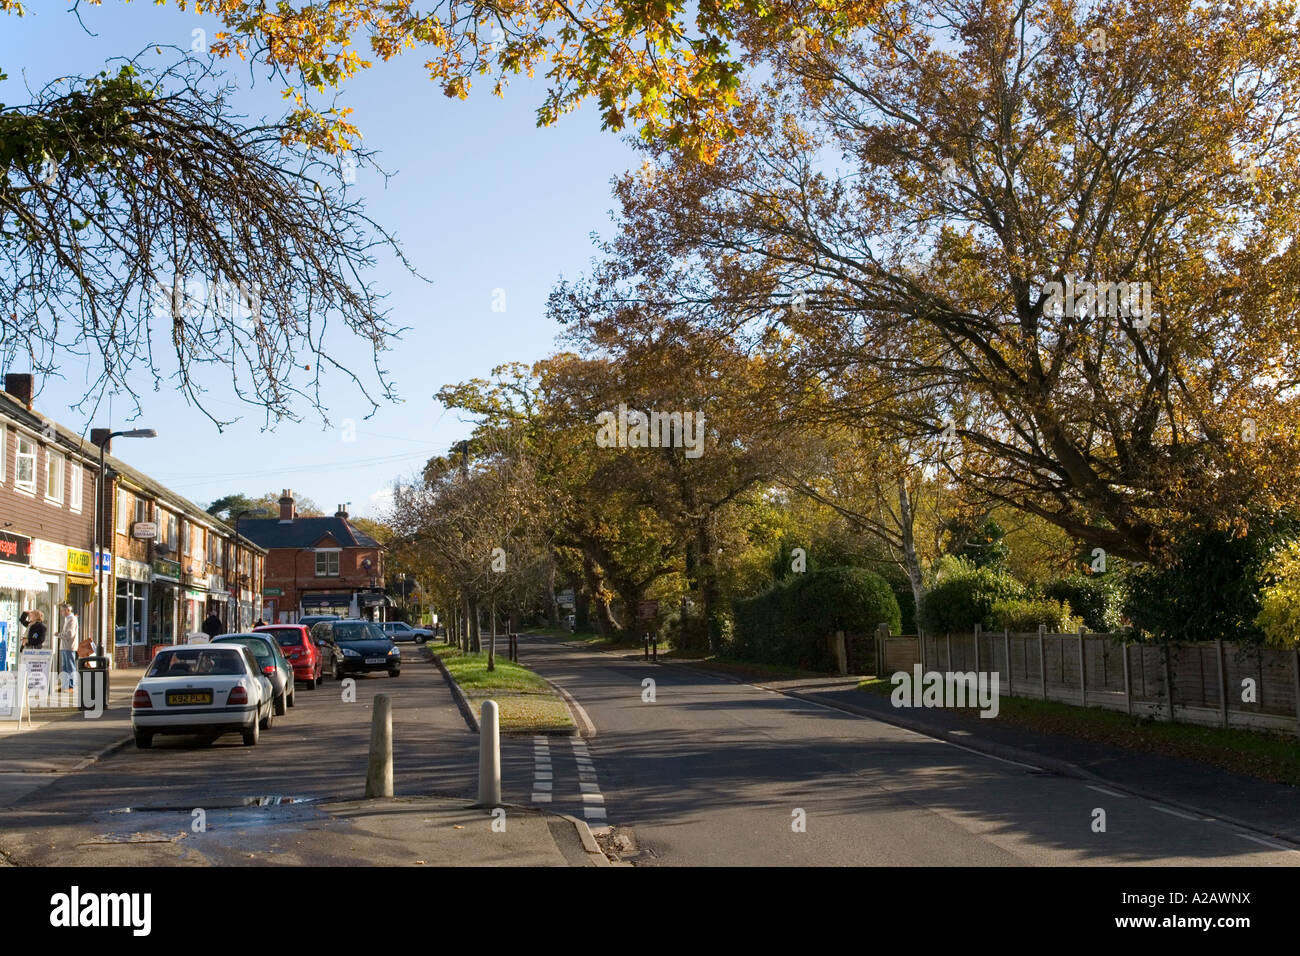 The New Forest village of Bransgore on a sunny autumn day Stock Photo